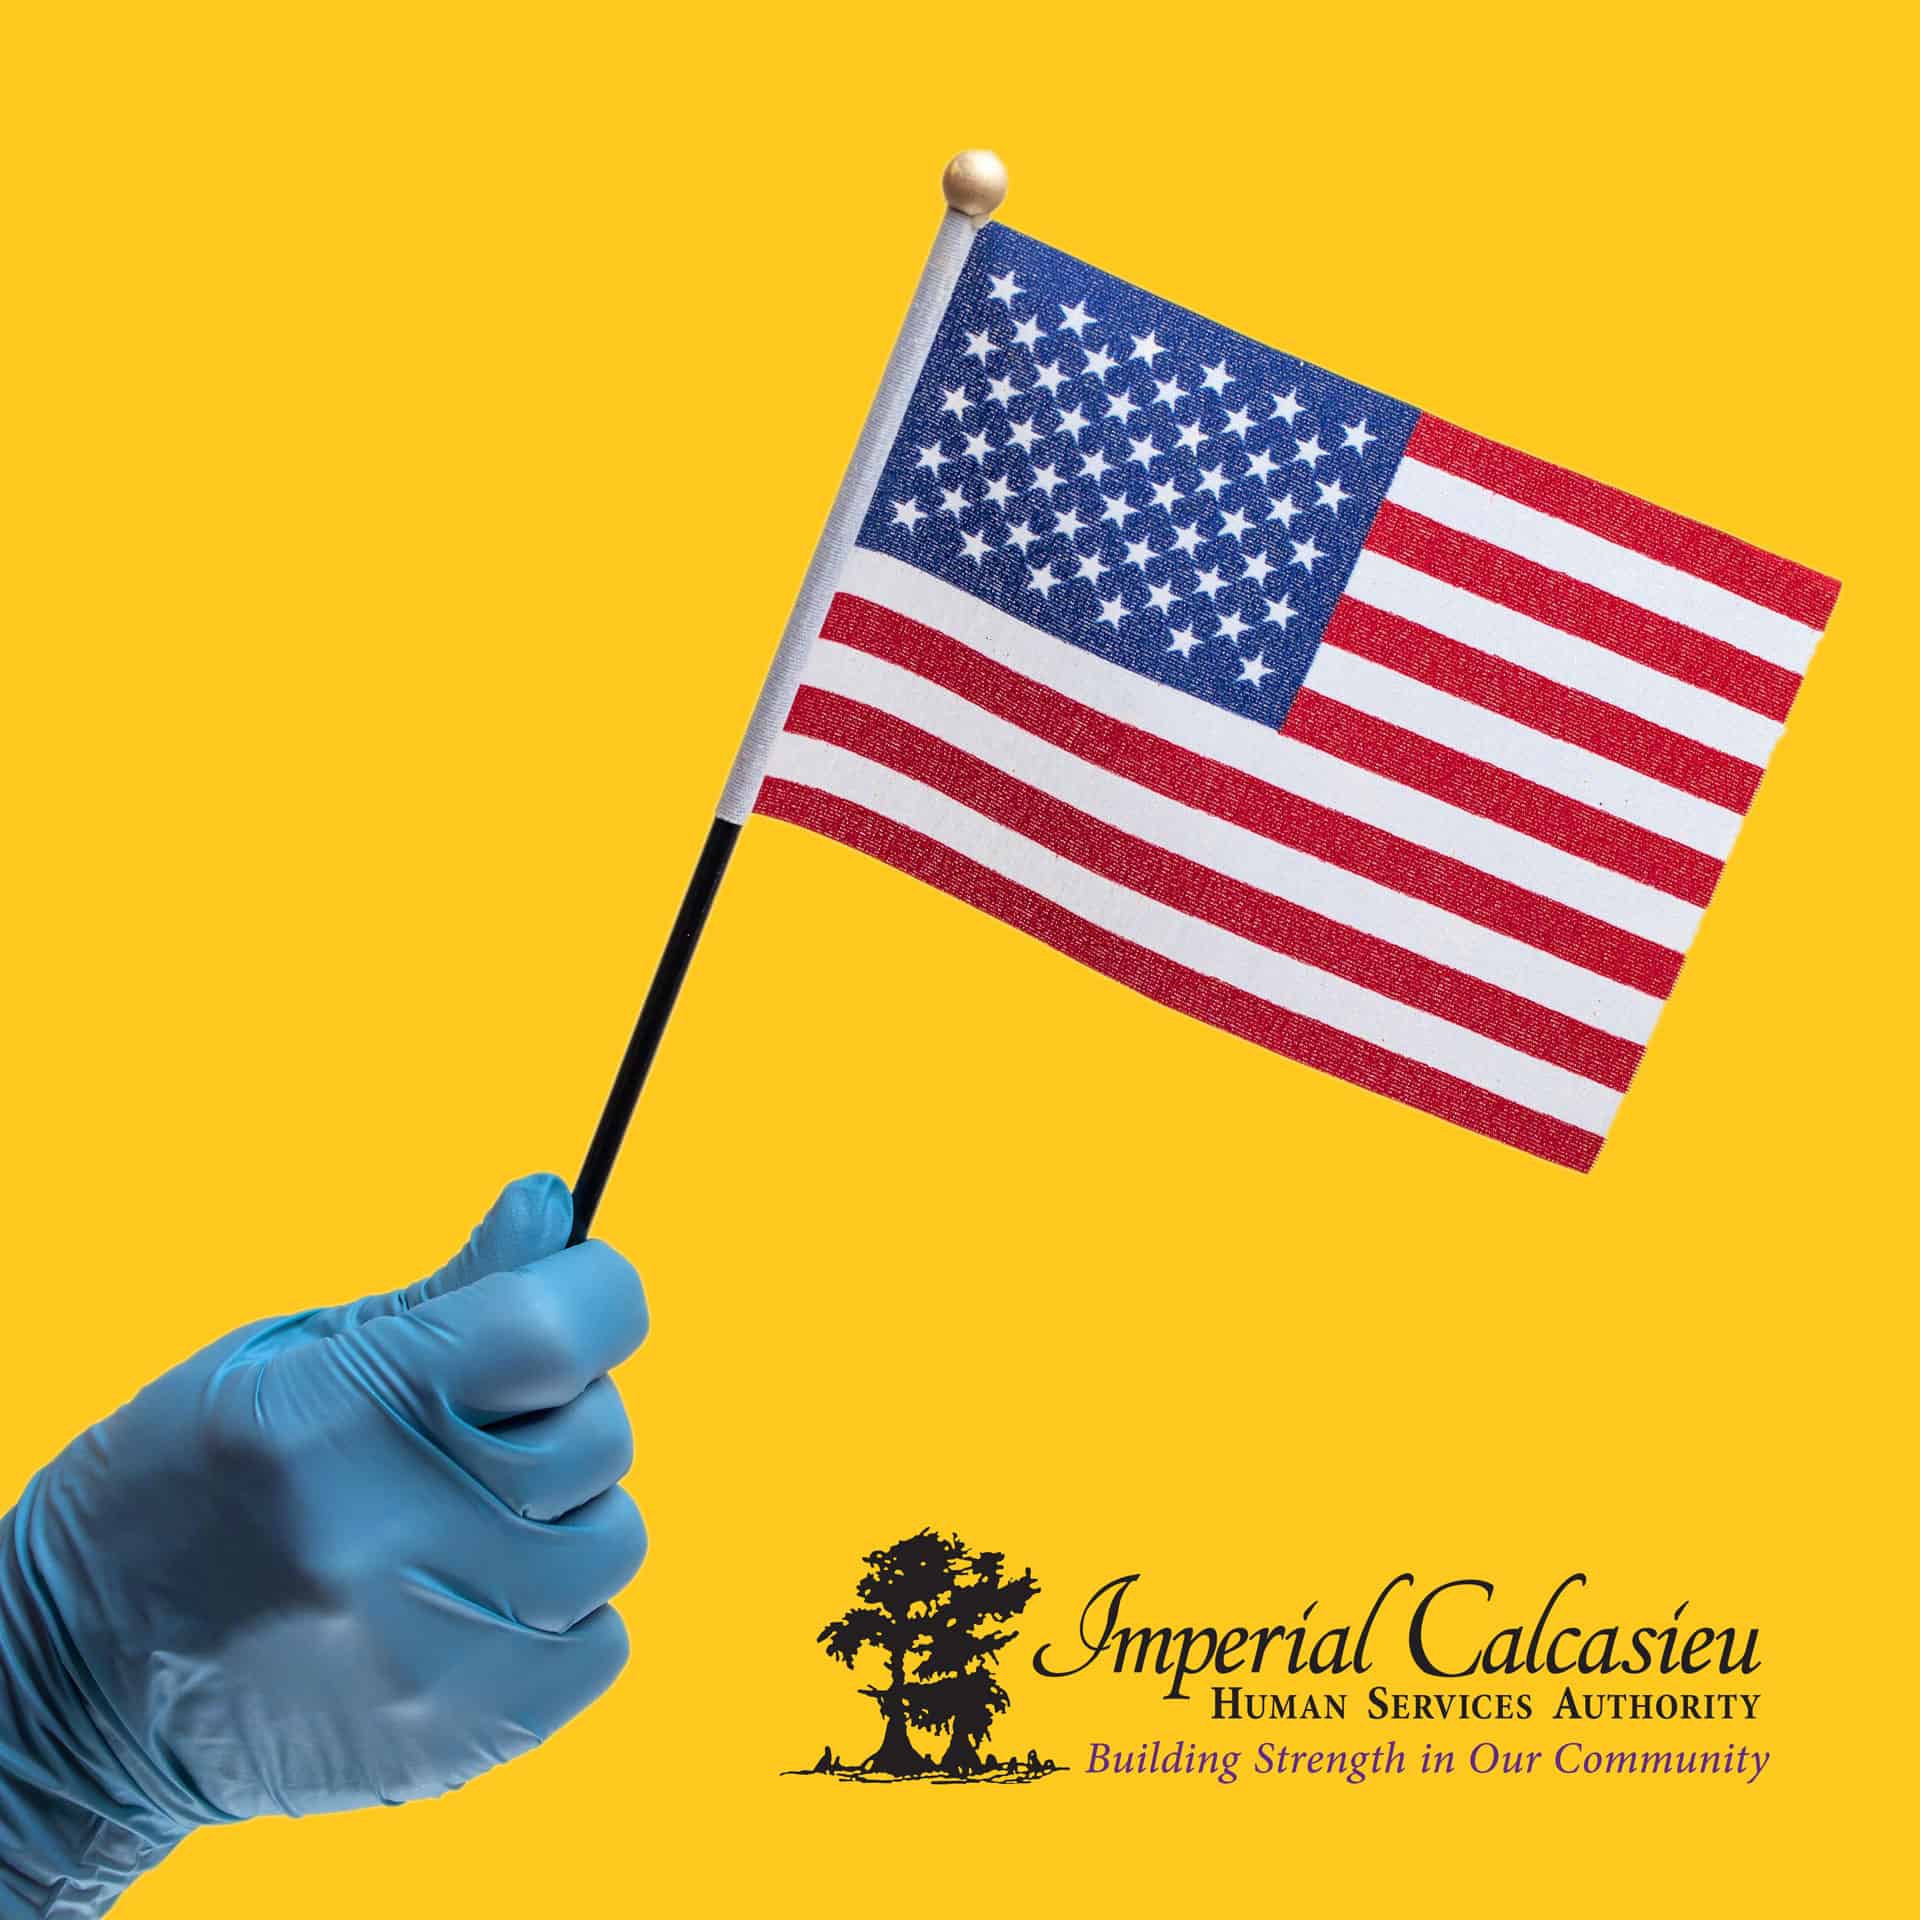 4th of July | Imperial Calcasieu Health Services Authority